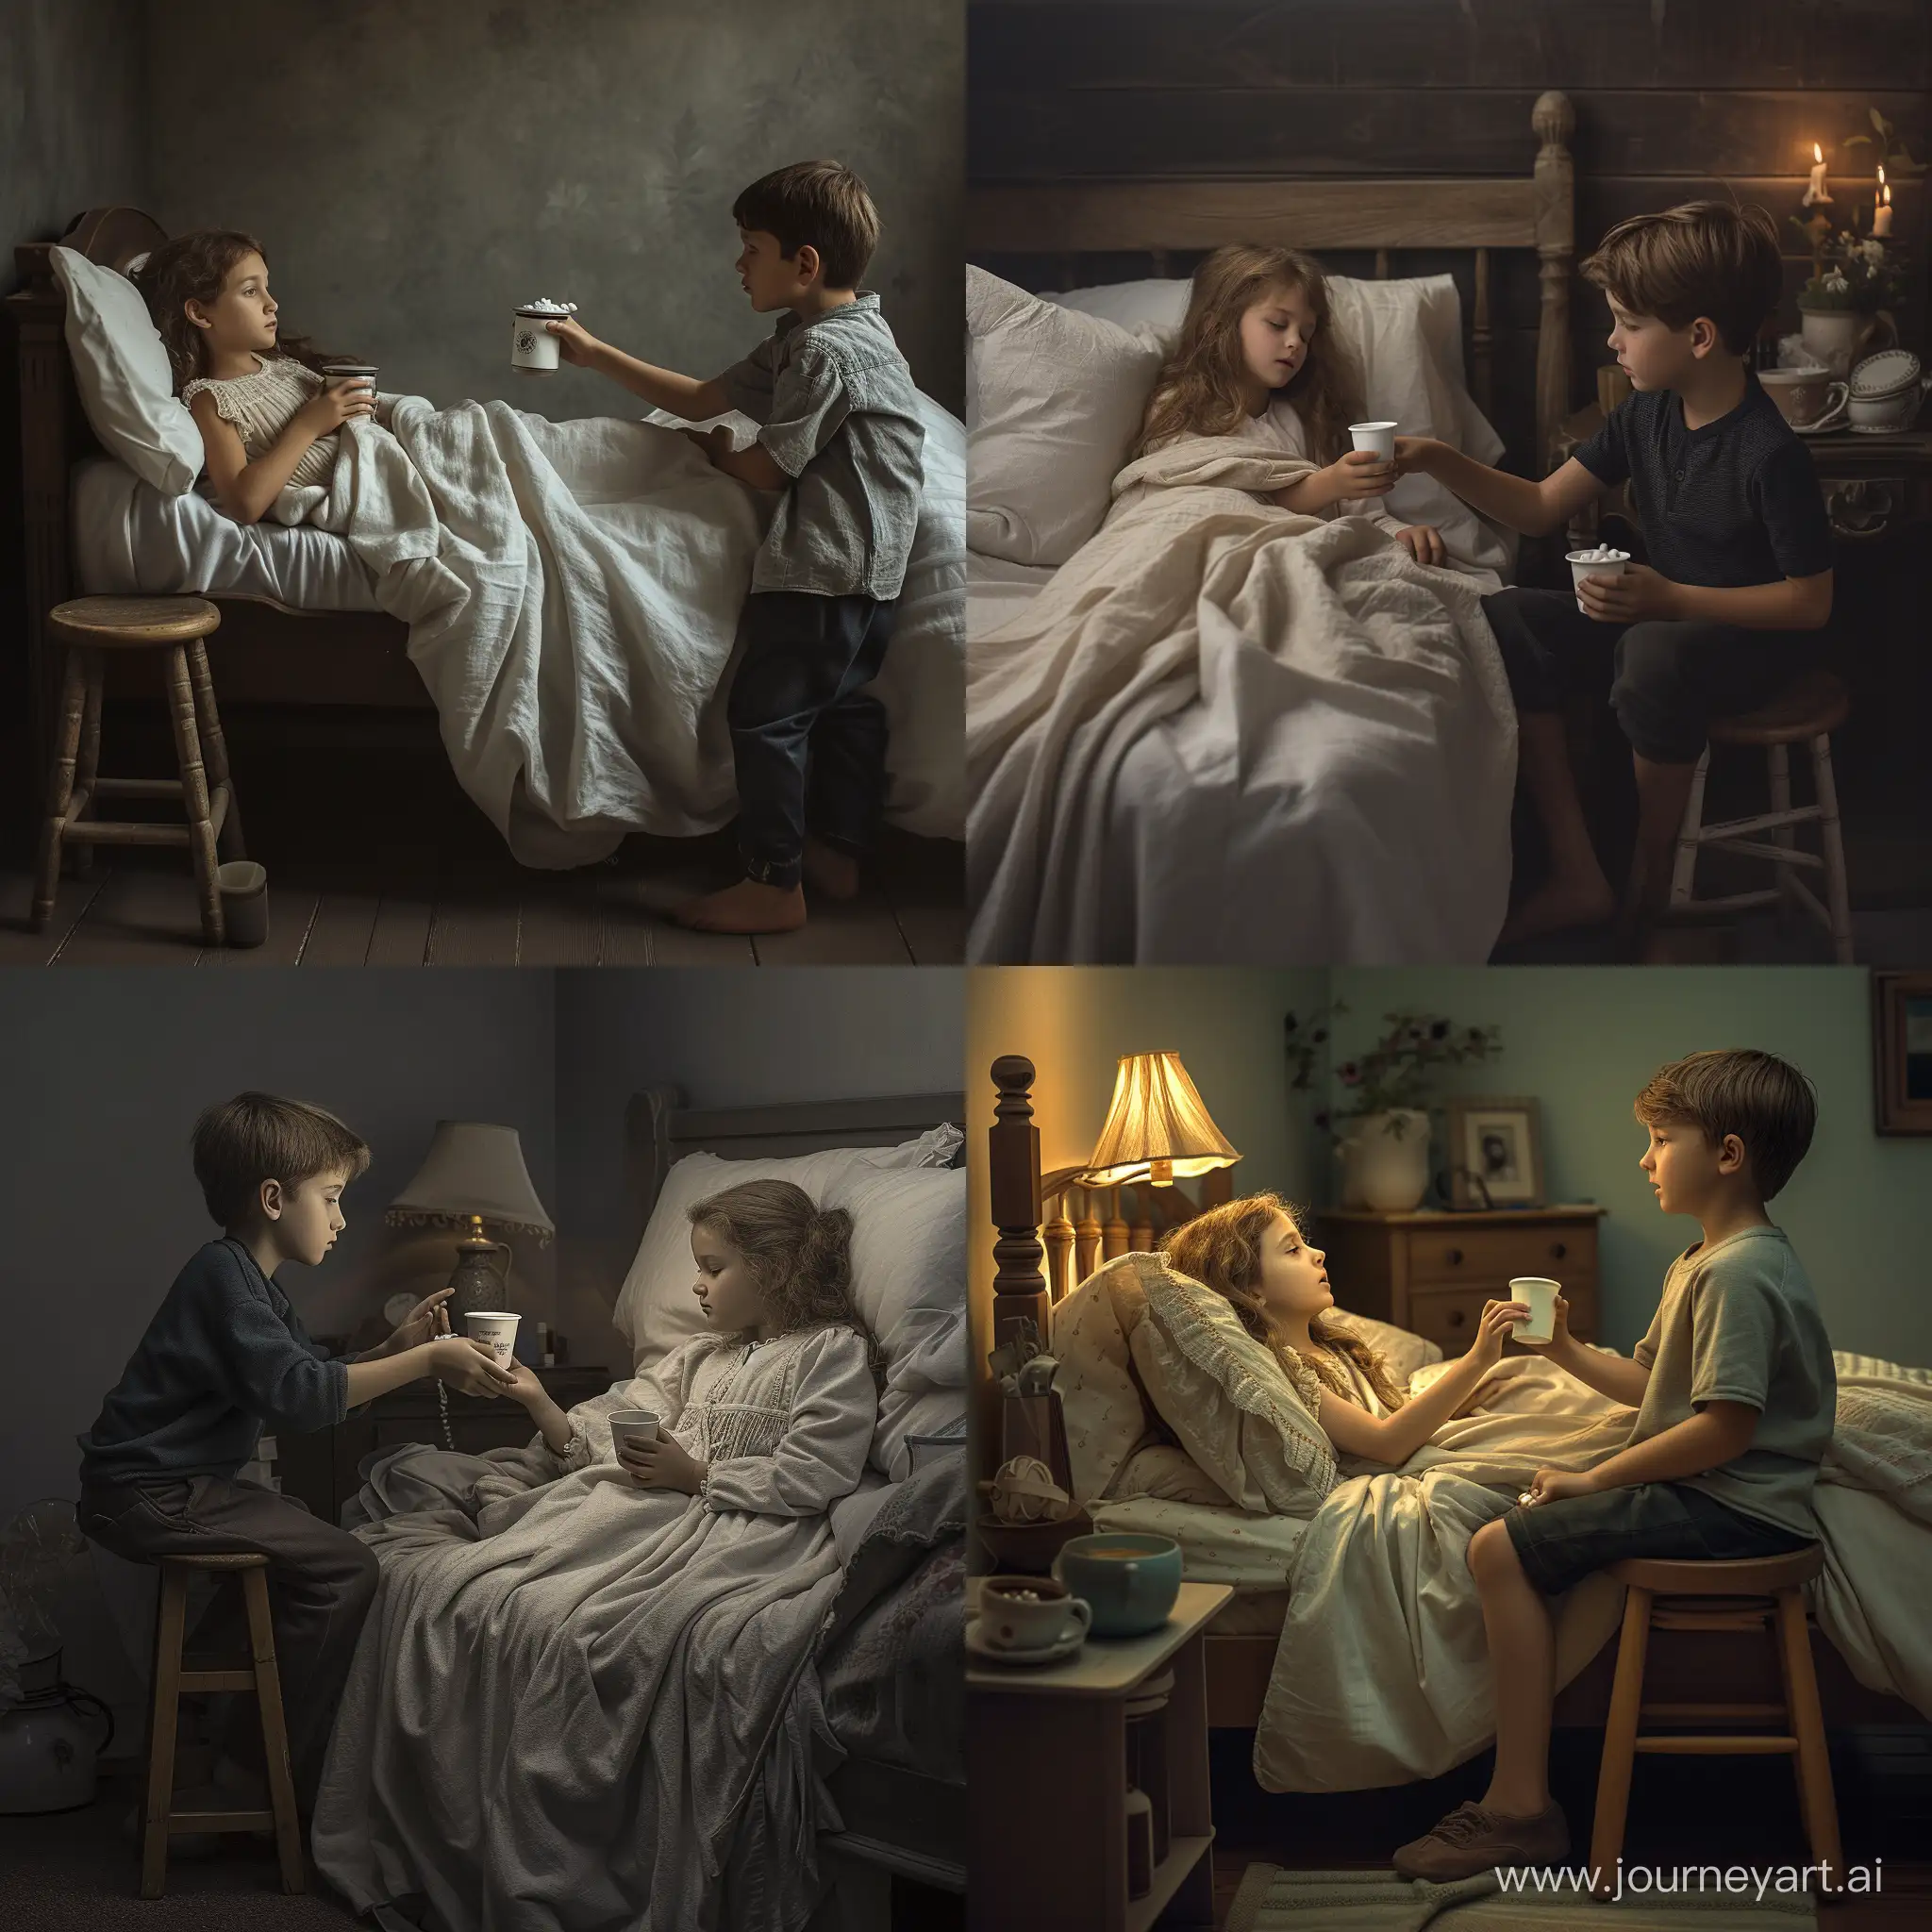 Caring-Brother-Offering-Medicine-to-Sick-Sister-in-Hyperrealistic-Photograph